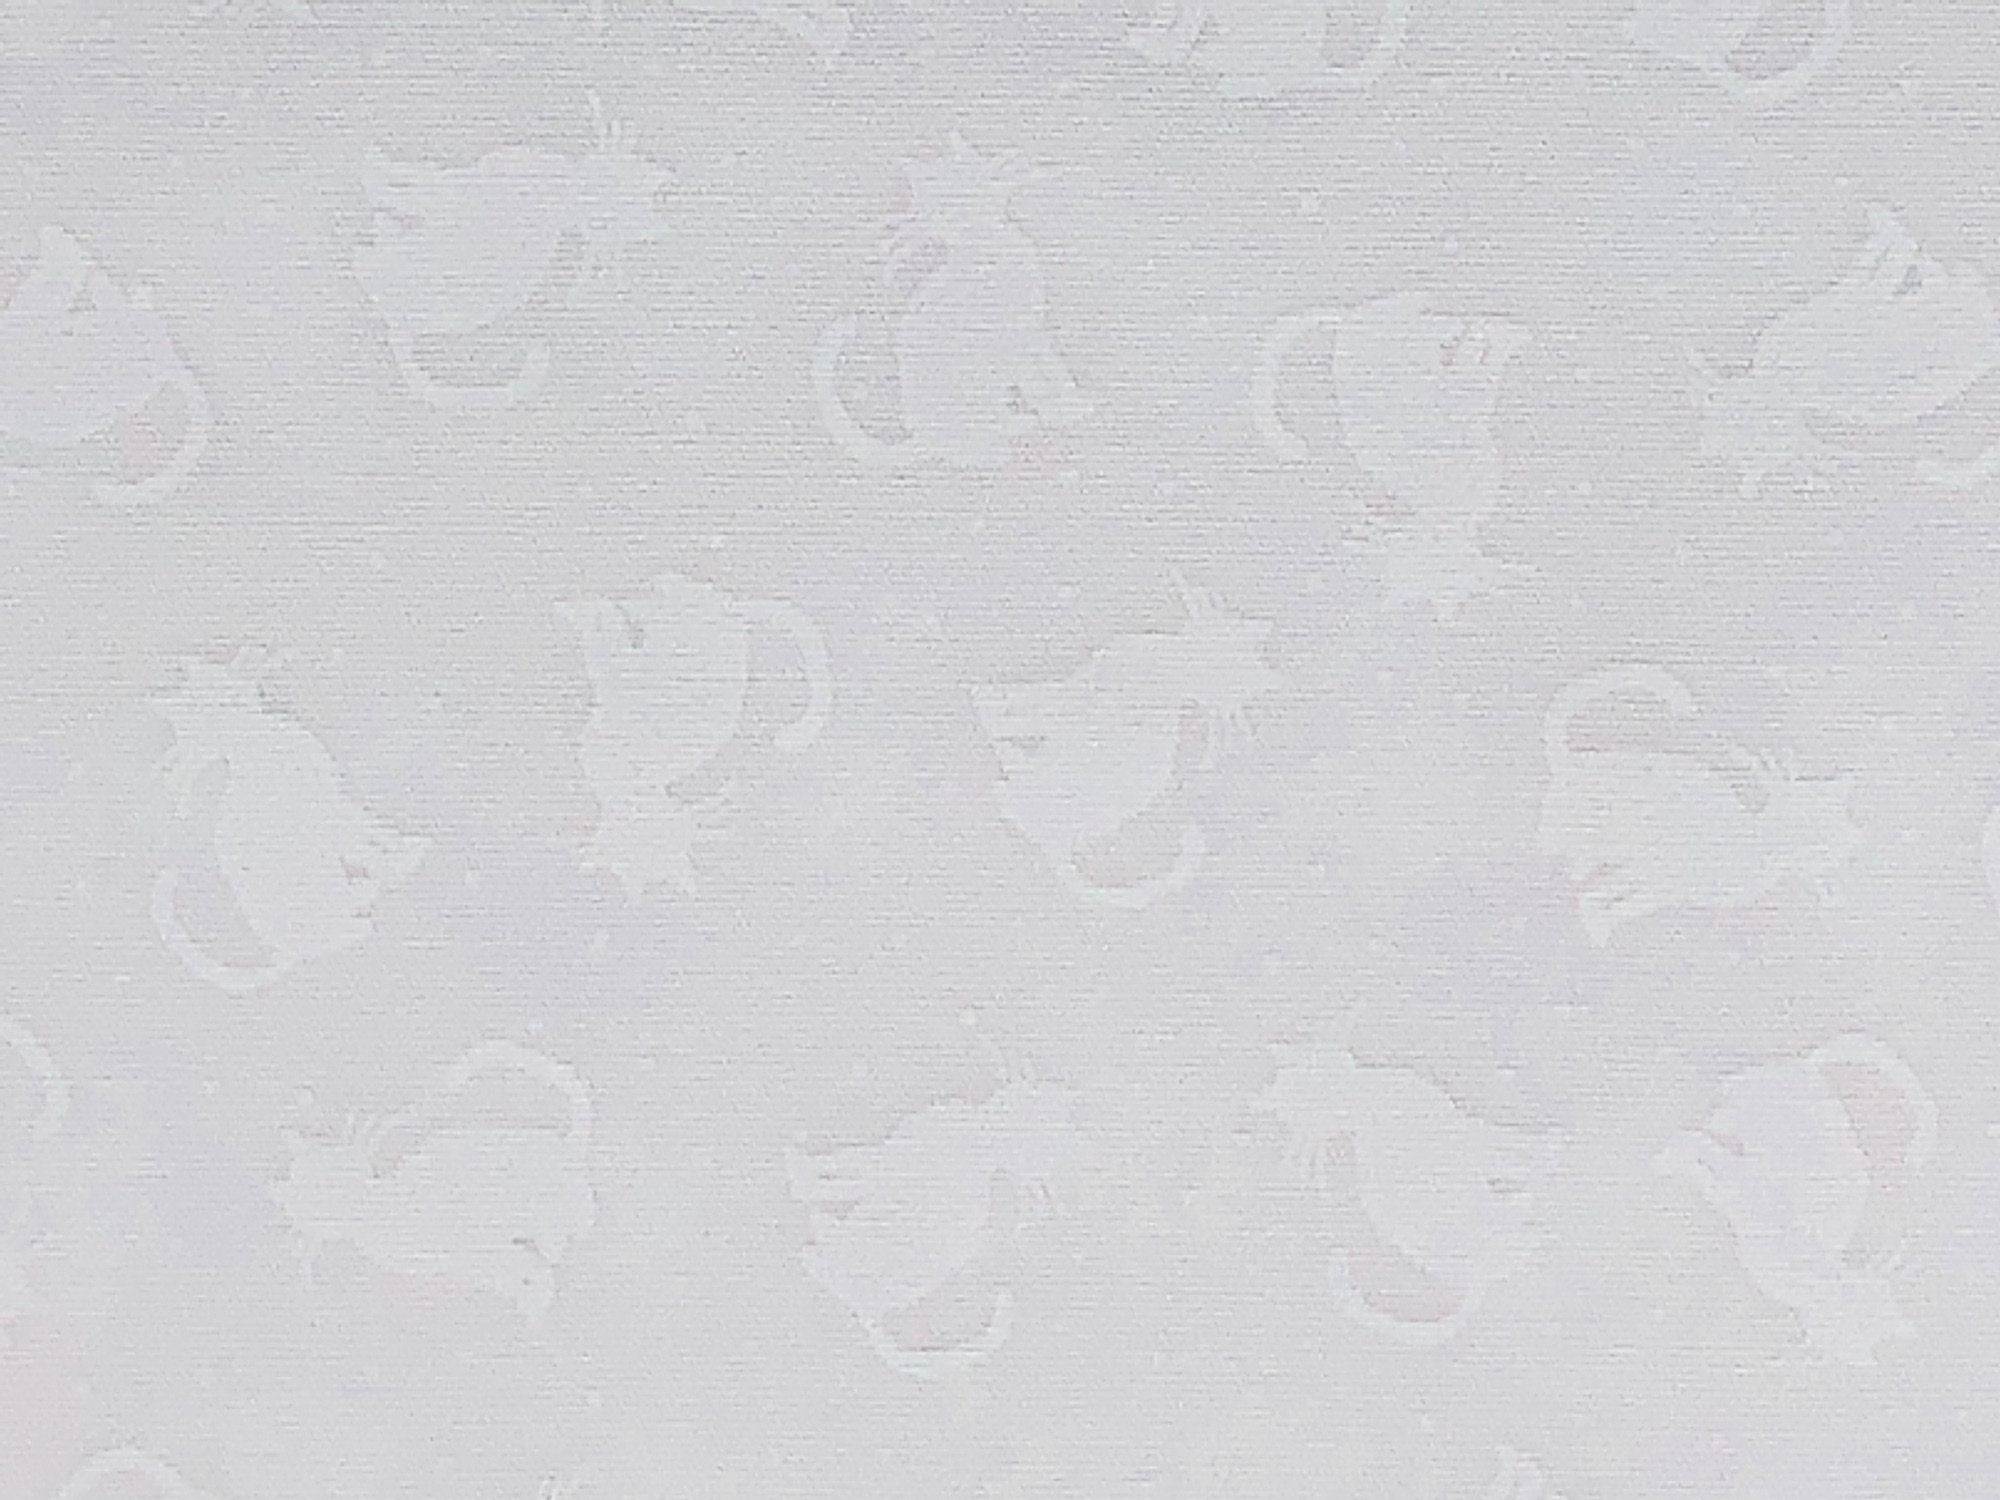 This fabric is called Better Basics Cats on White and has small cats on a white background